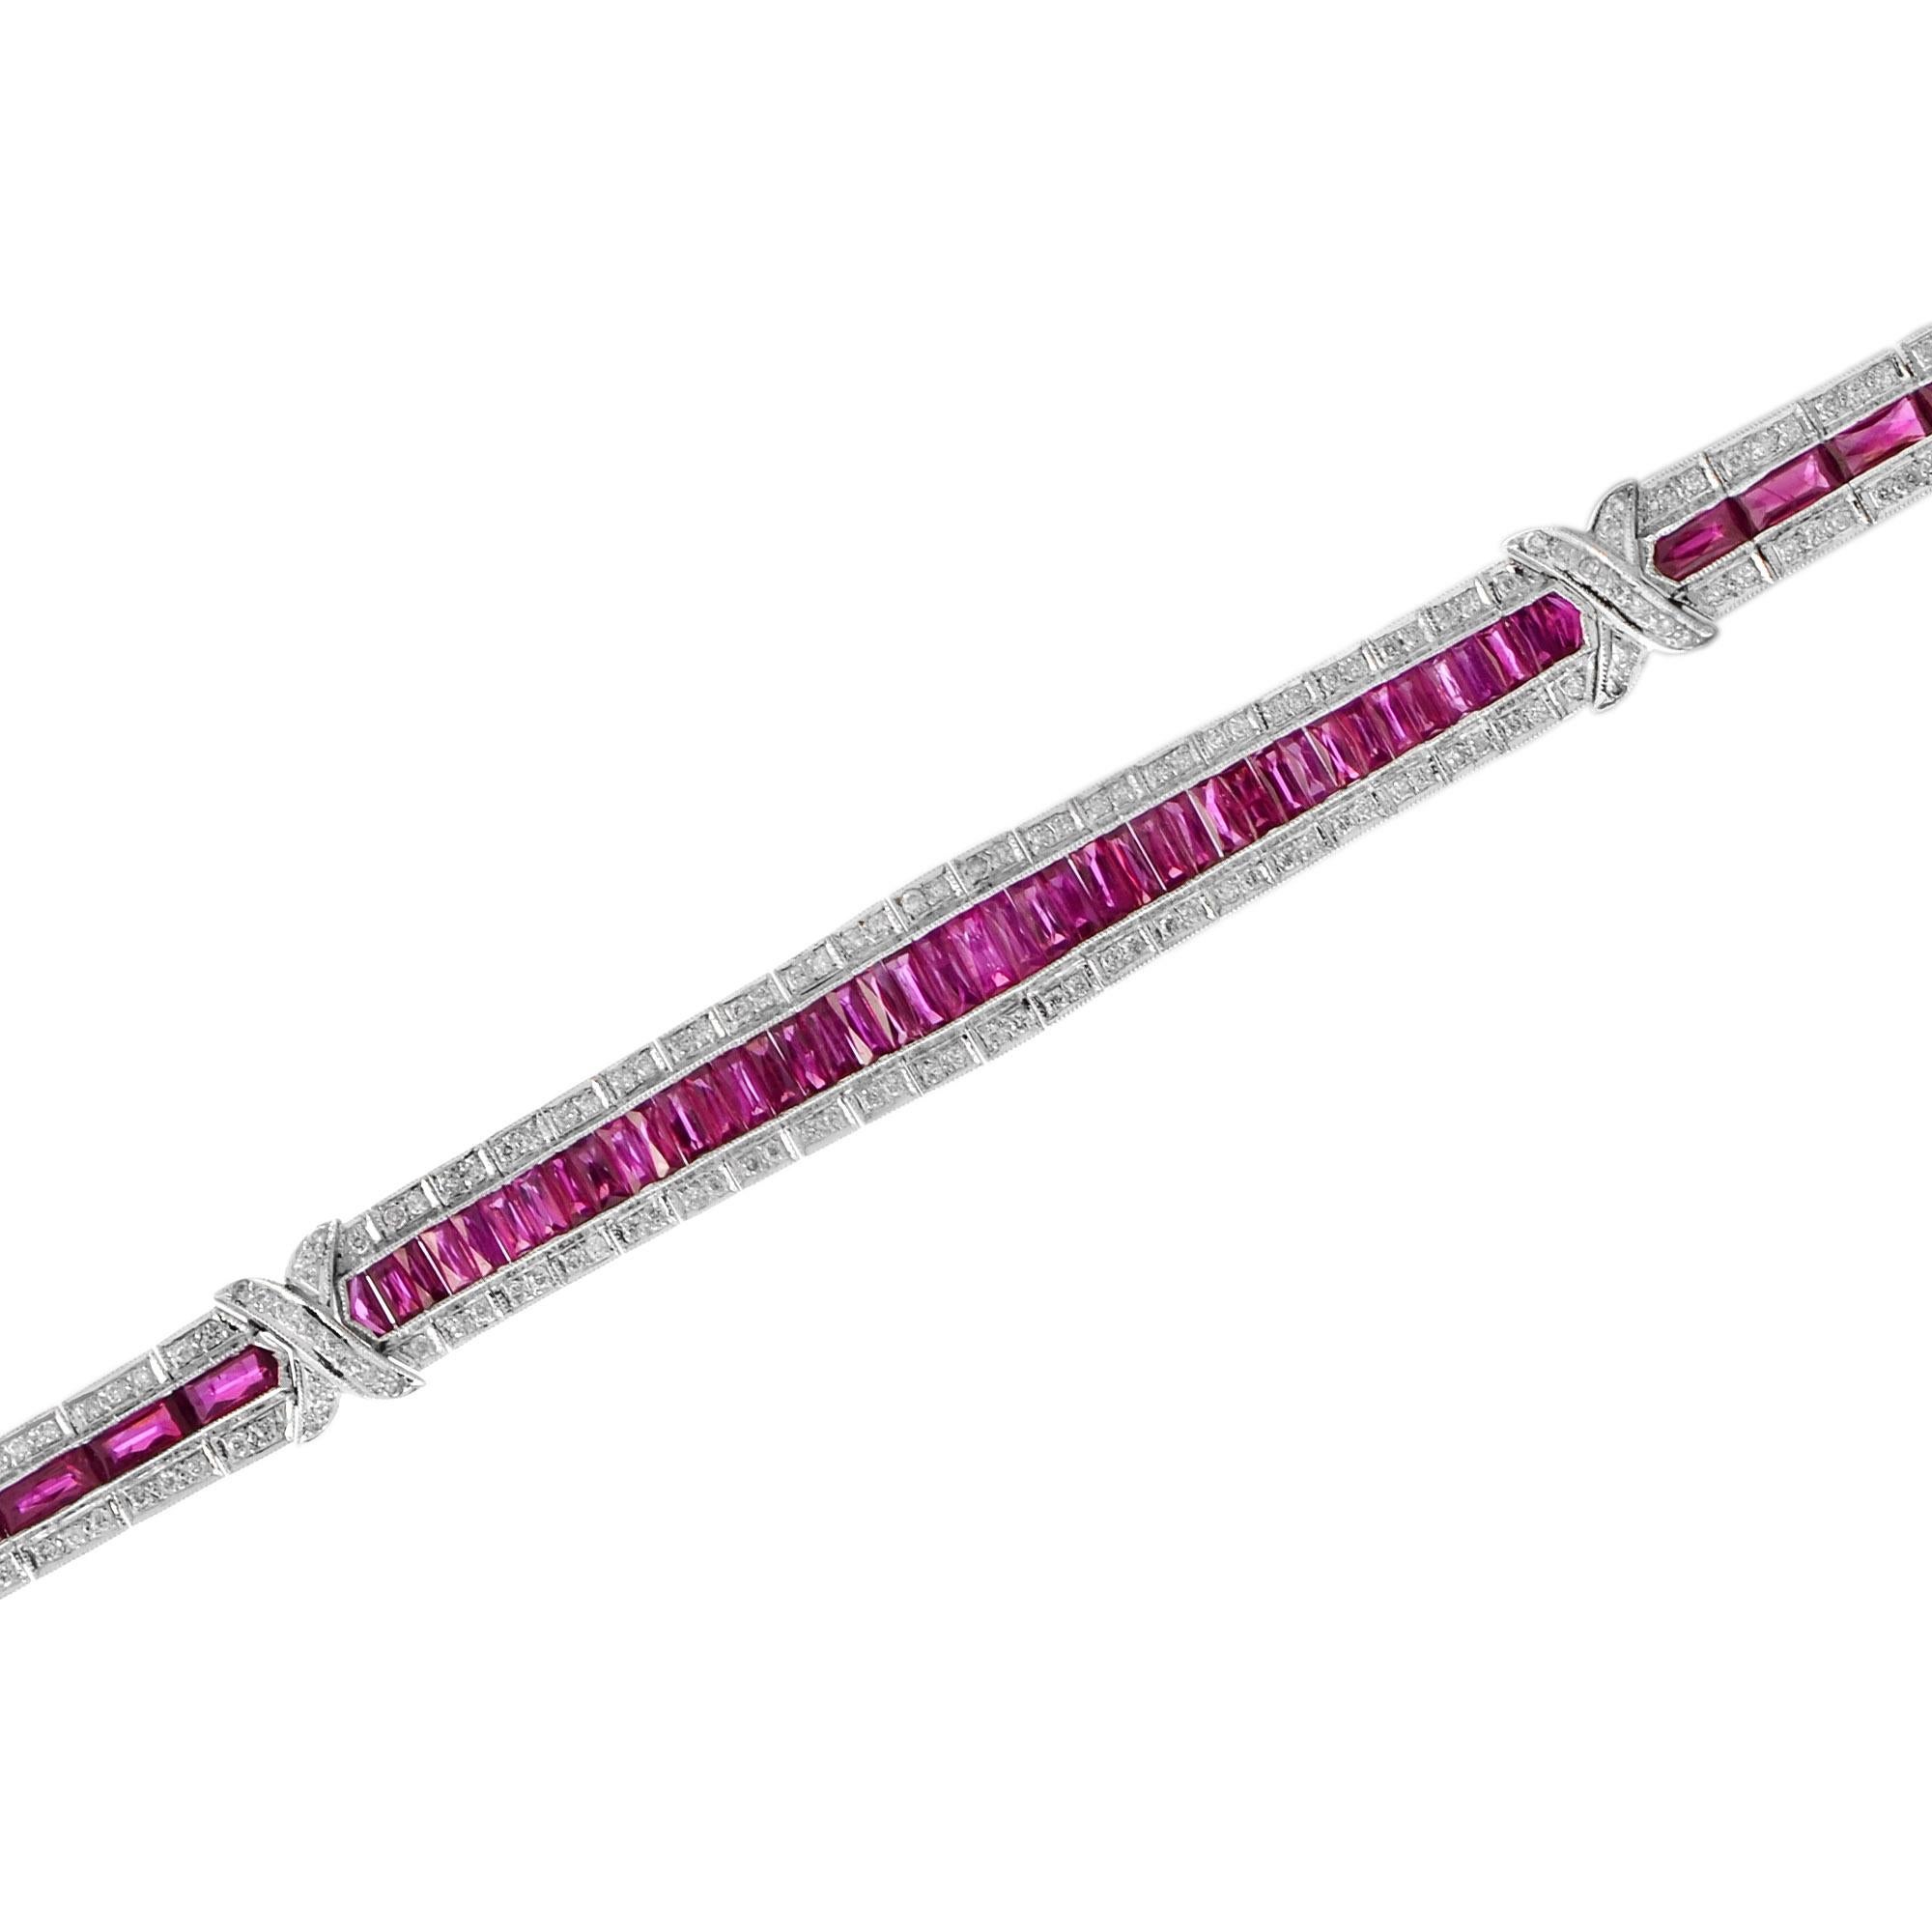 This stunning Art Deco Style ruby and diamond18k  white gold link bracelet features 242 round brilliant cut diamonds. 66 rectangular French cut rubies break up the two sections of diamonds, adding a beautiful design and pop of bright color! A truly